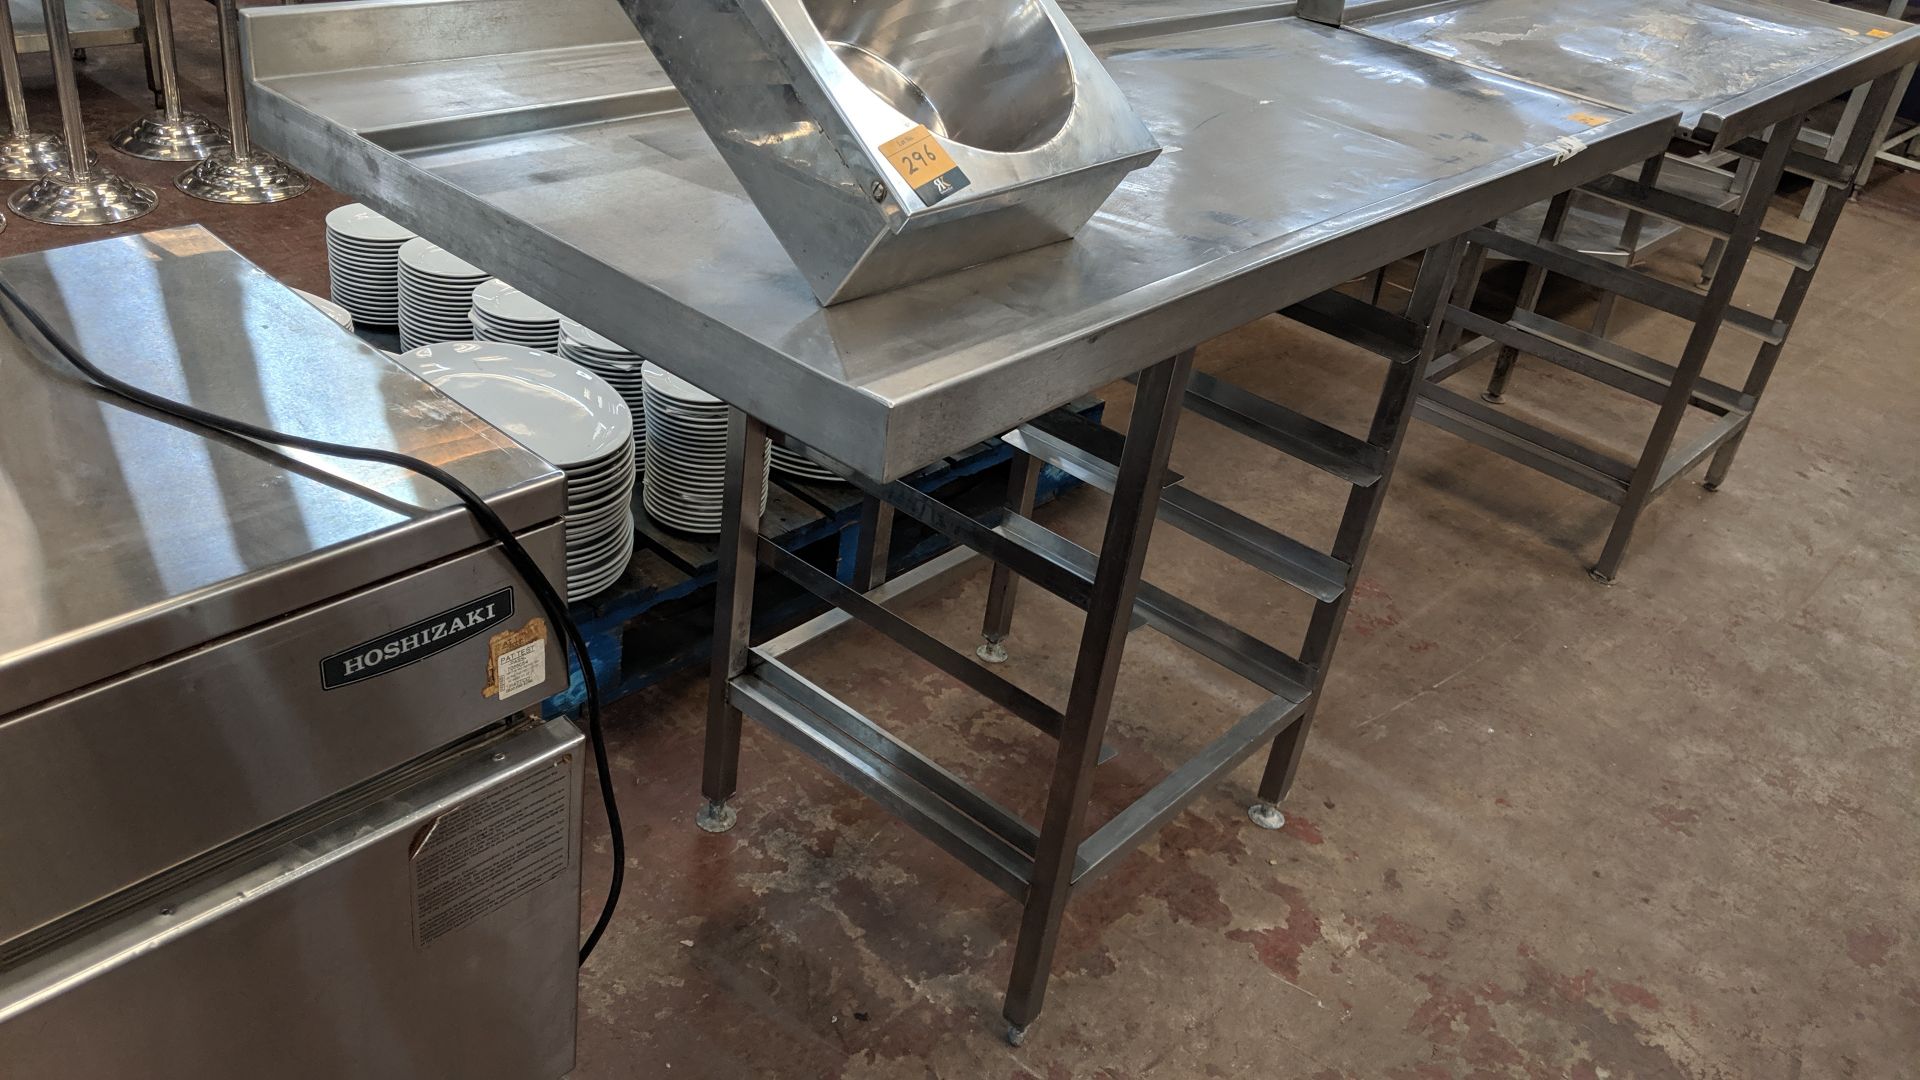 Stainless steel feeder table for use with commercial dishwasher, including tray store below